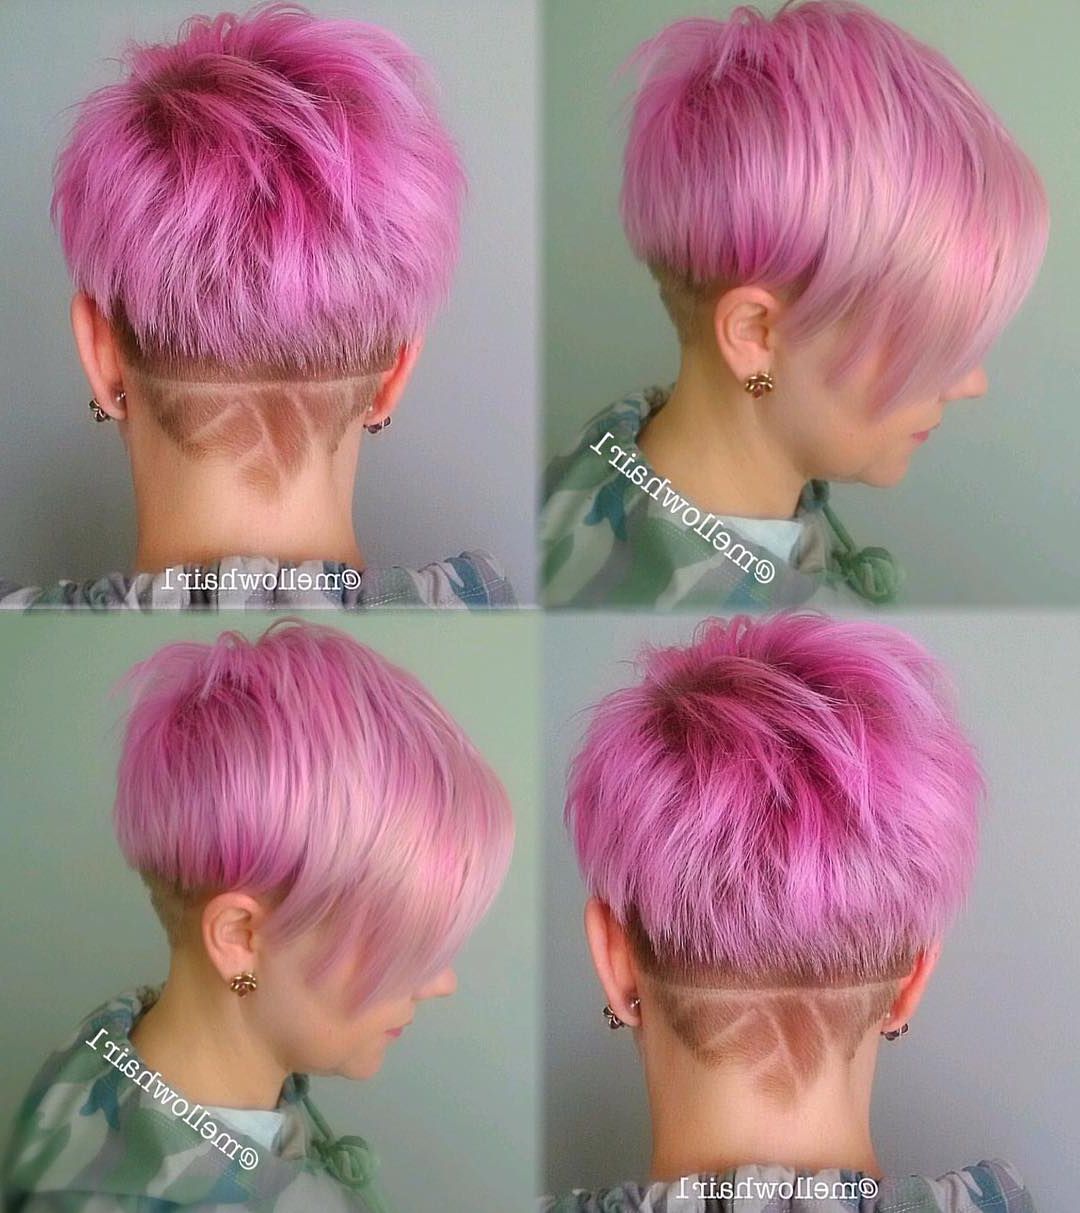 40 Cool And Contemporary Short Haircuts For Women – Popular Haircuts Inside Pink Short Hairstyles (View 4 of 25)